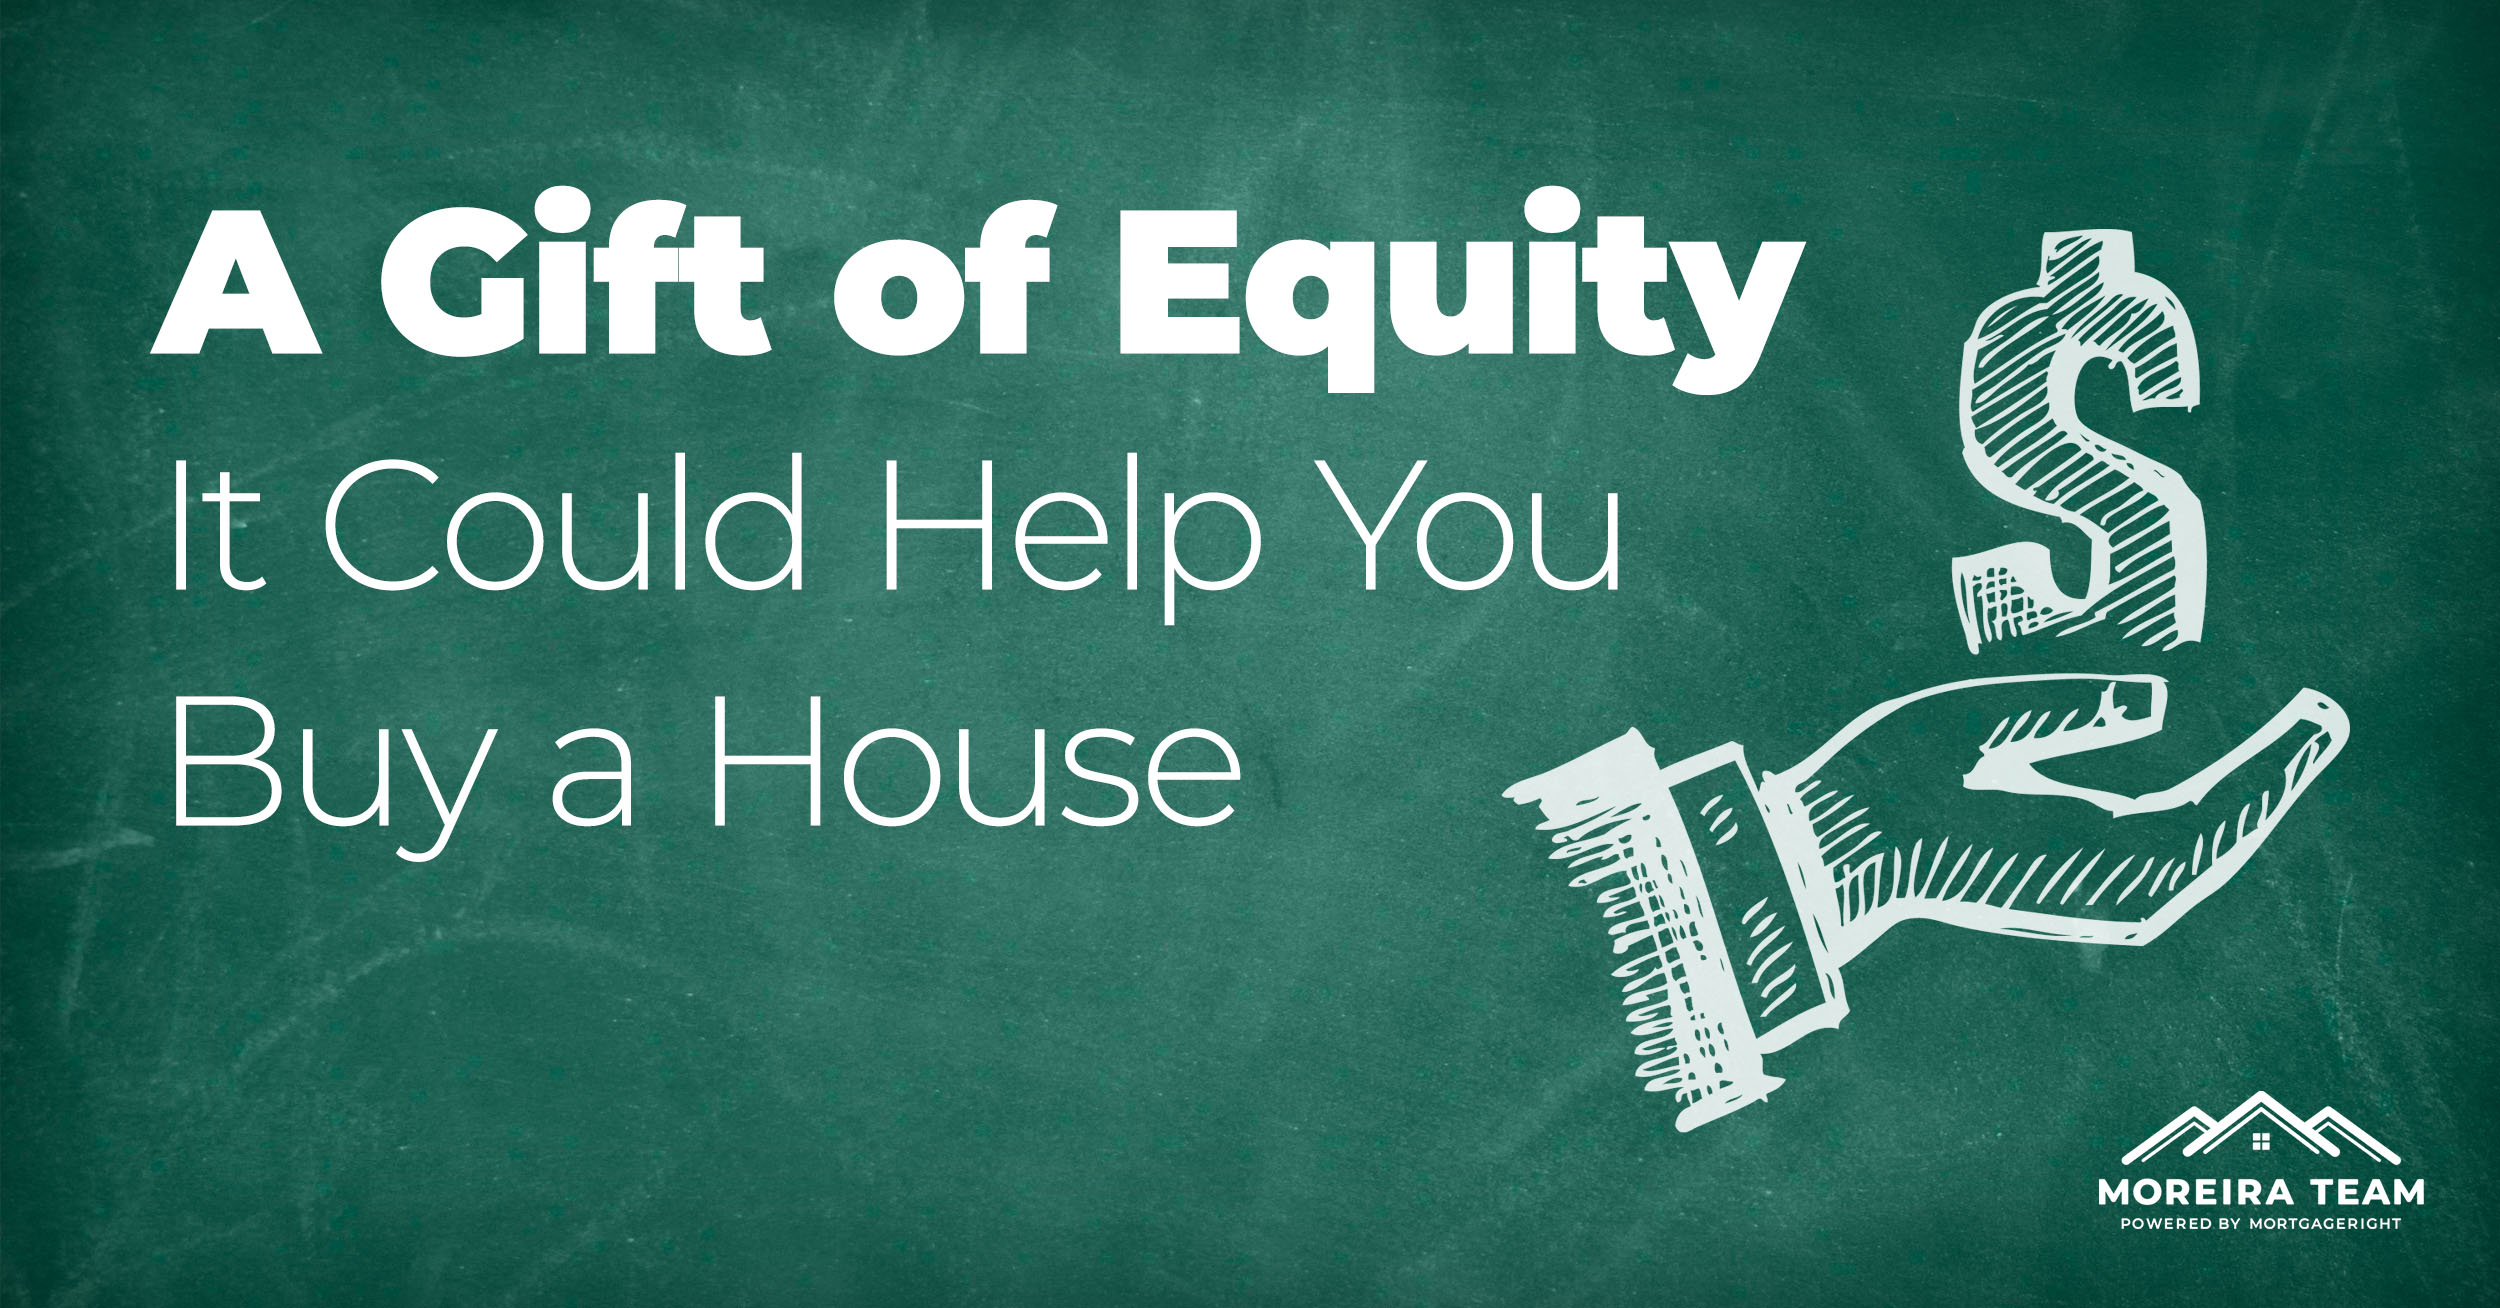 How a Gift of Equity Could Help You Meet the Requirements to Buy a House